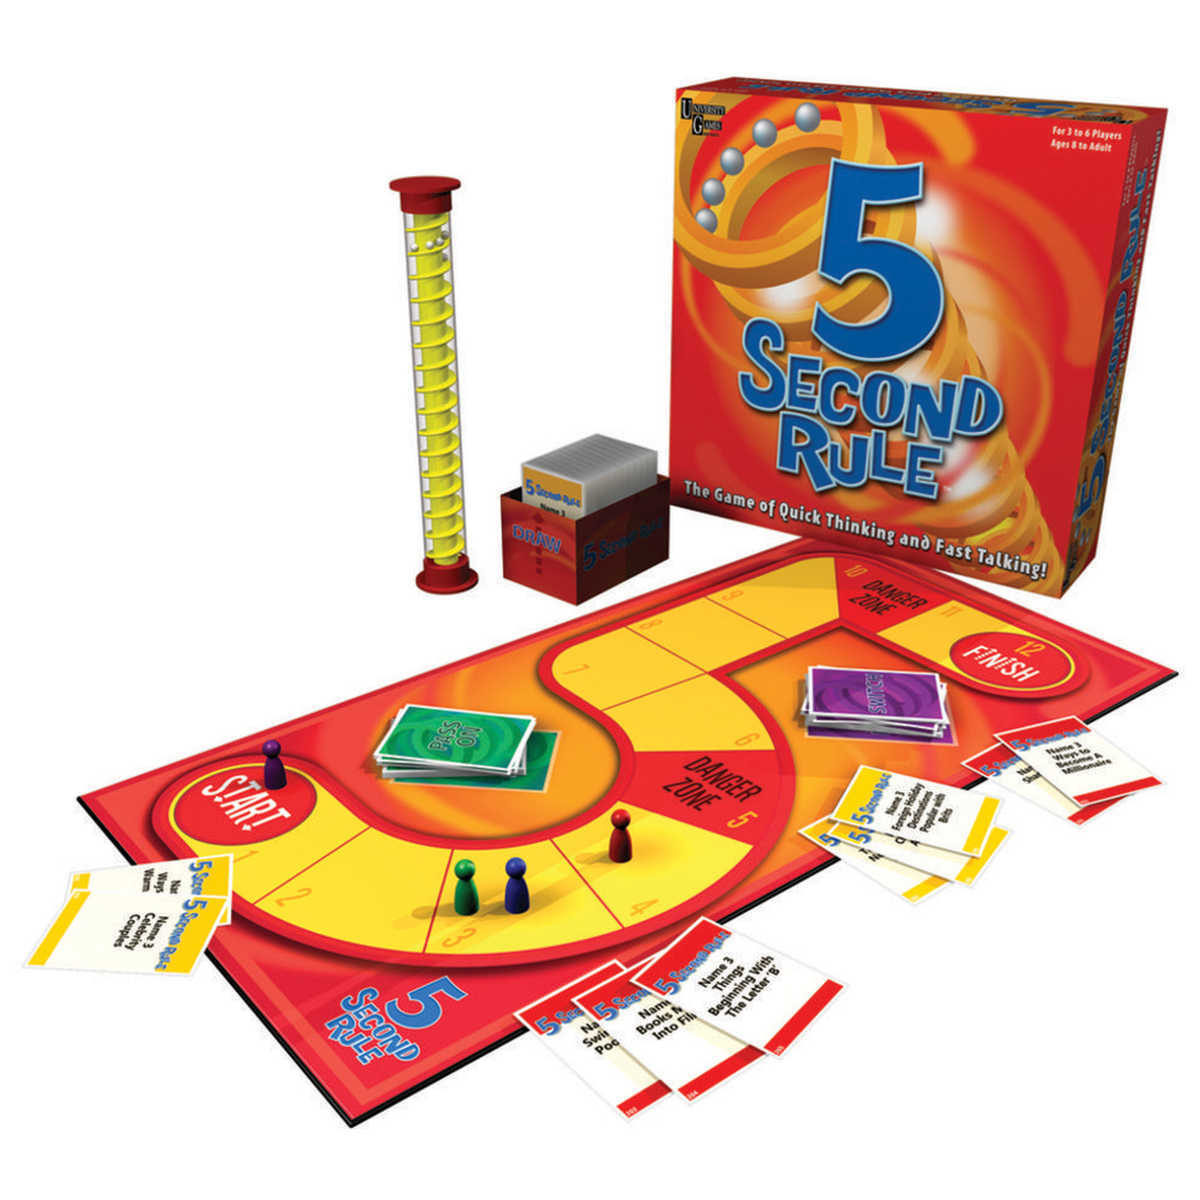 5 second rule board game review